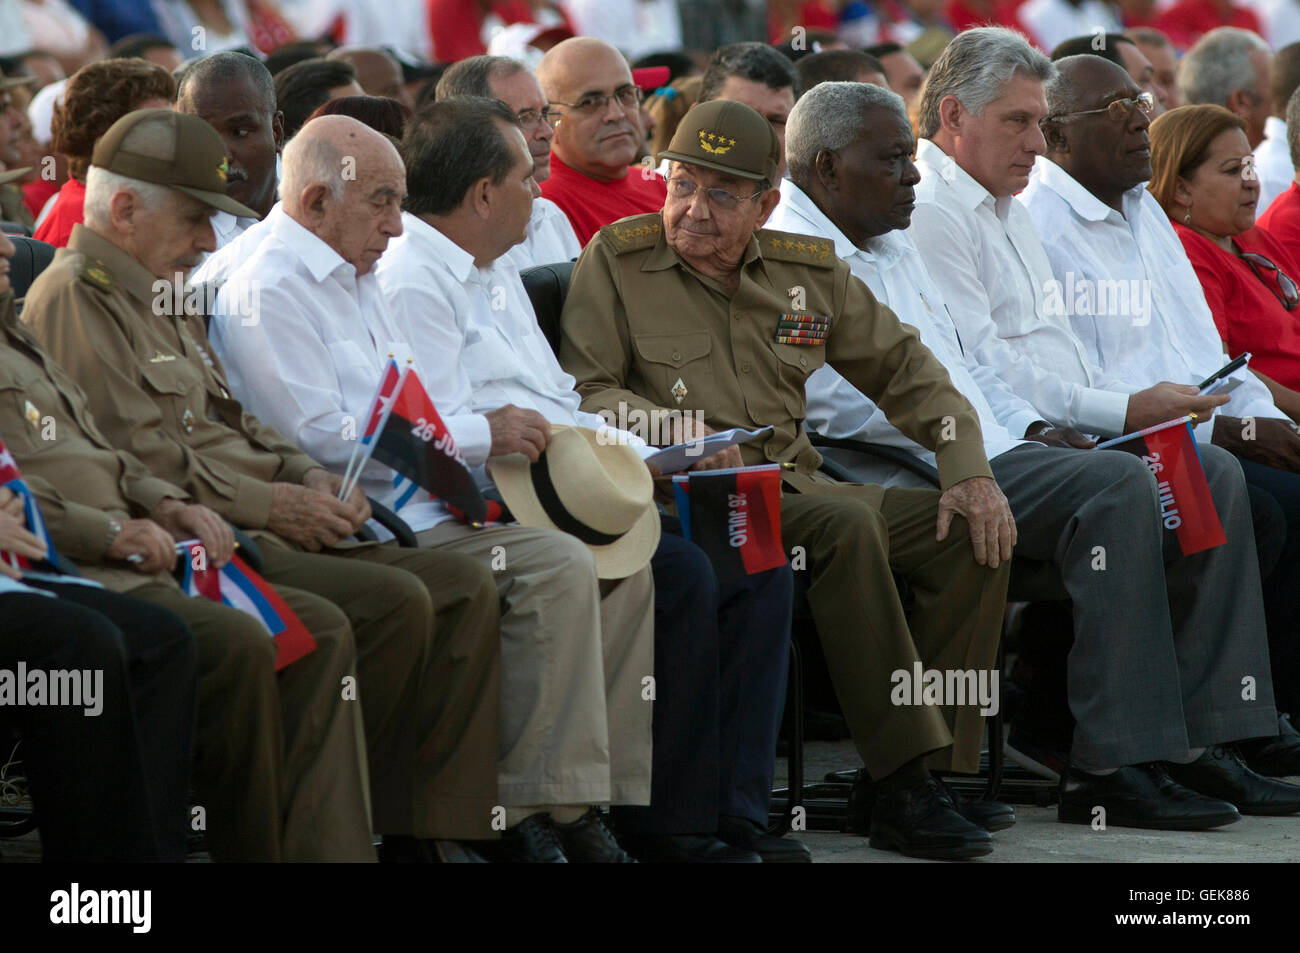 Sancti Spiritus, Cuba. 26th July, 2016. Cuban President Raul Castro (4th L, front) attends a commemoration ceremony of the National Rebellion Day in Sancti Spiritus, Cuba, on July 26, 2016. © Ismael Francisco/Cubadebate/Pool/Xinhua/Alamy Live News Stock Photo